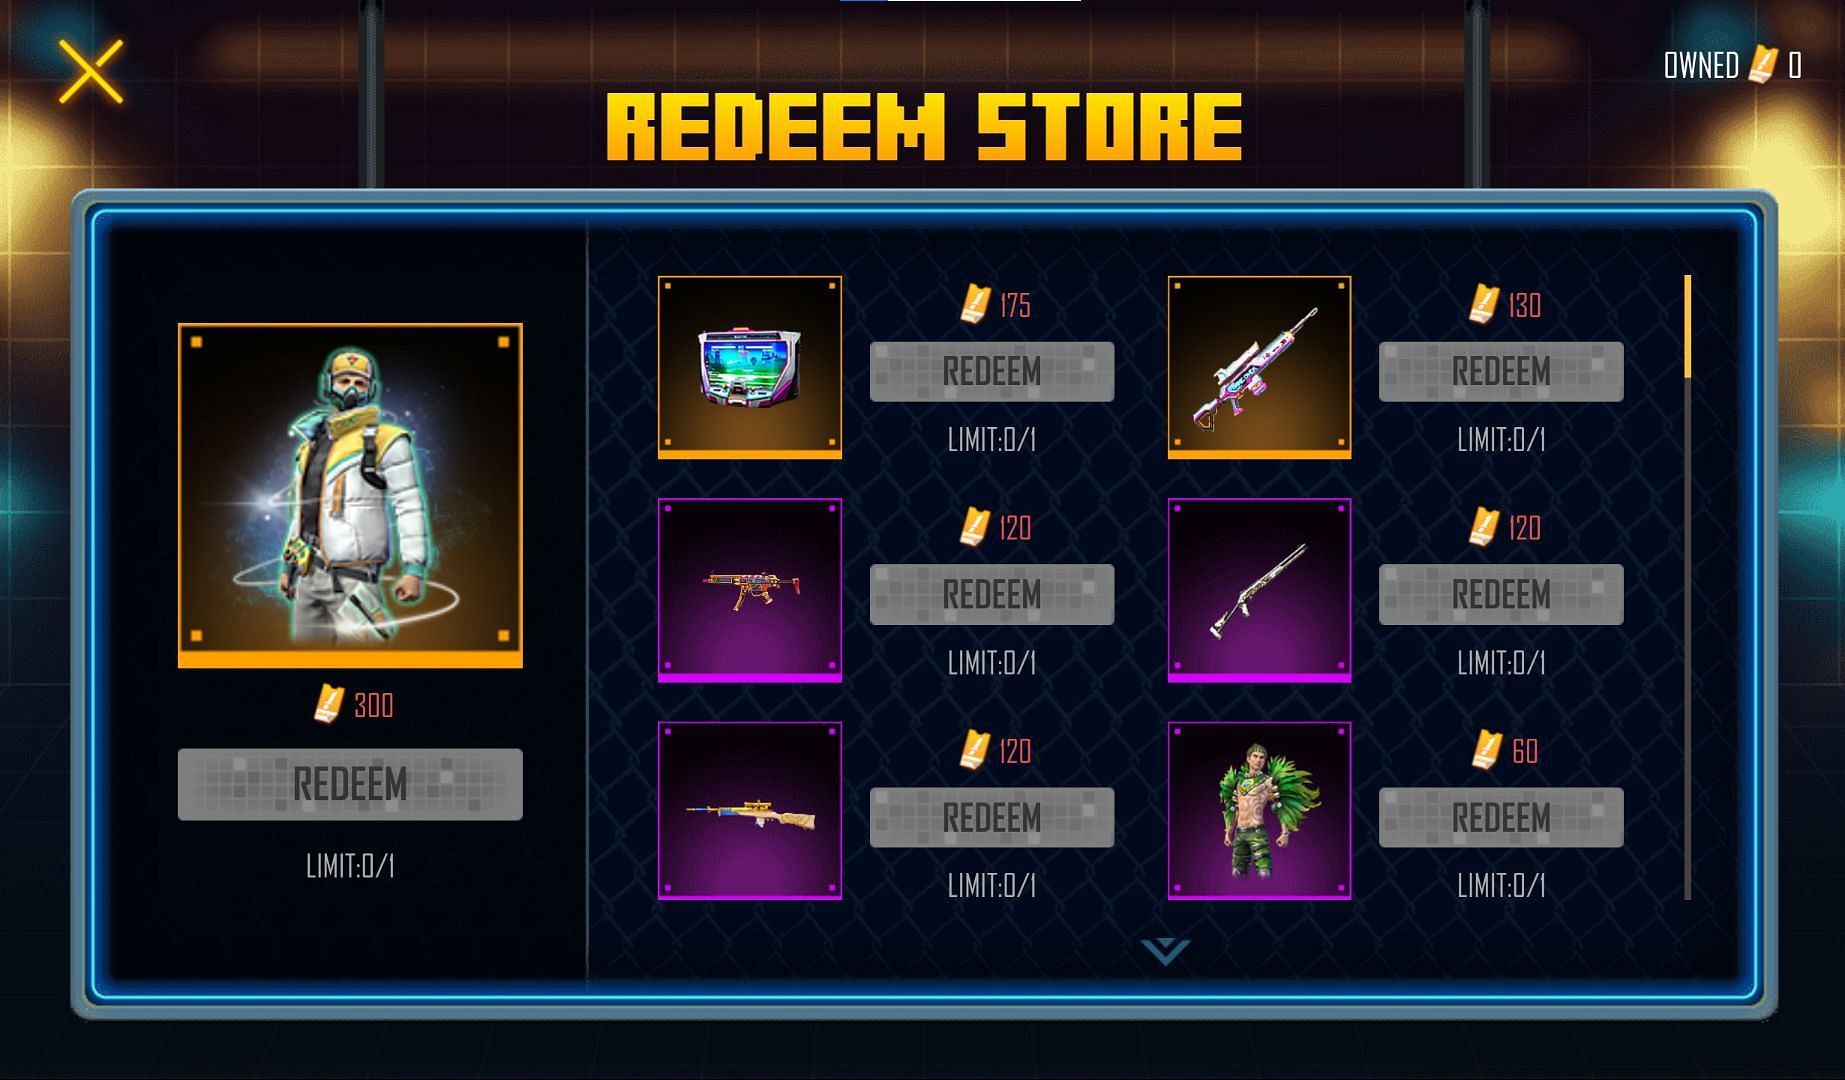 The Redeem Store can be used for exchanging rewards for coupons (Image via Garena)